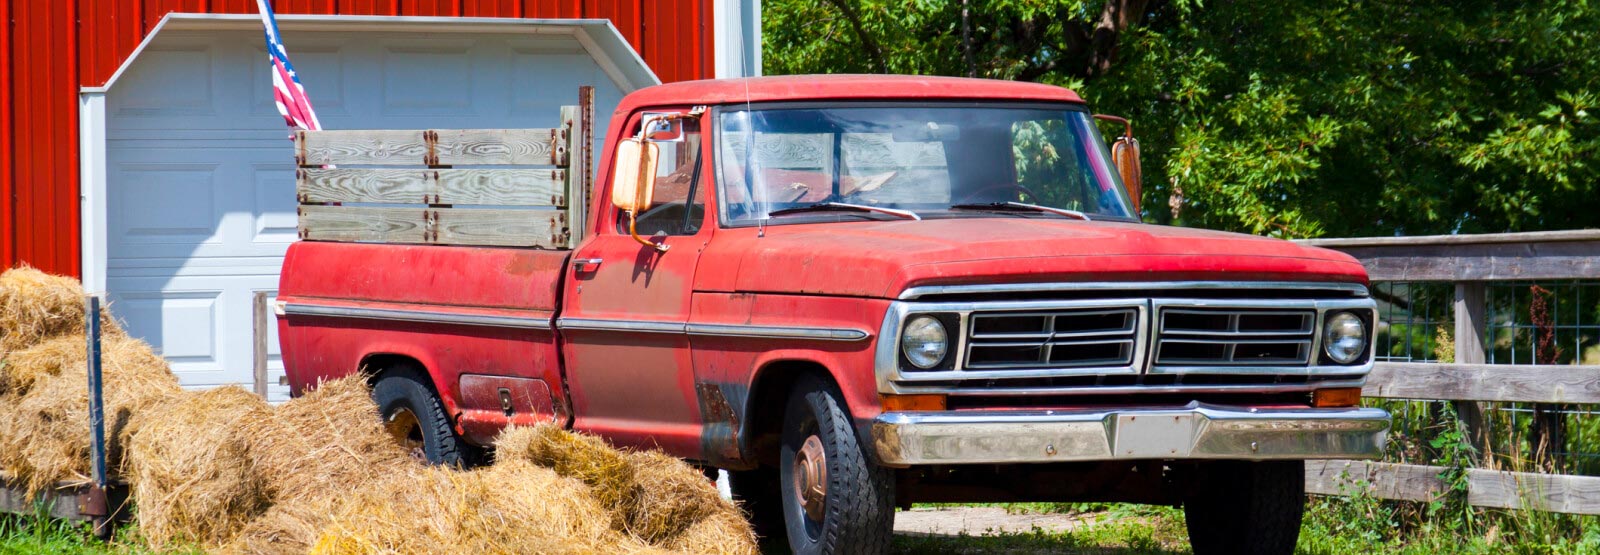 An old red farm truck with an American flag in the background